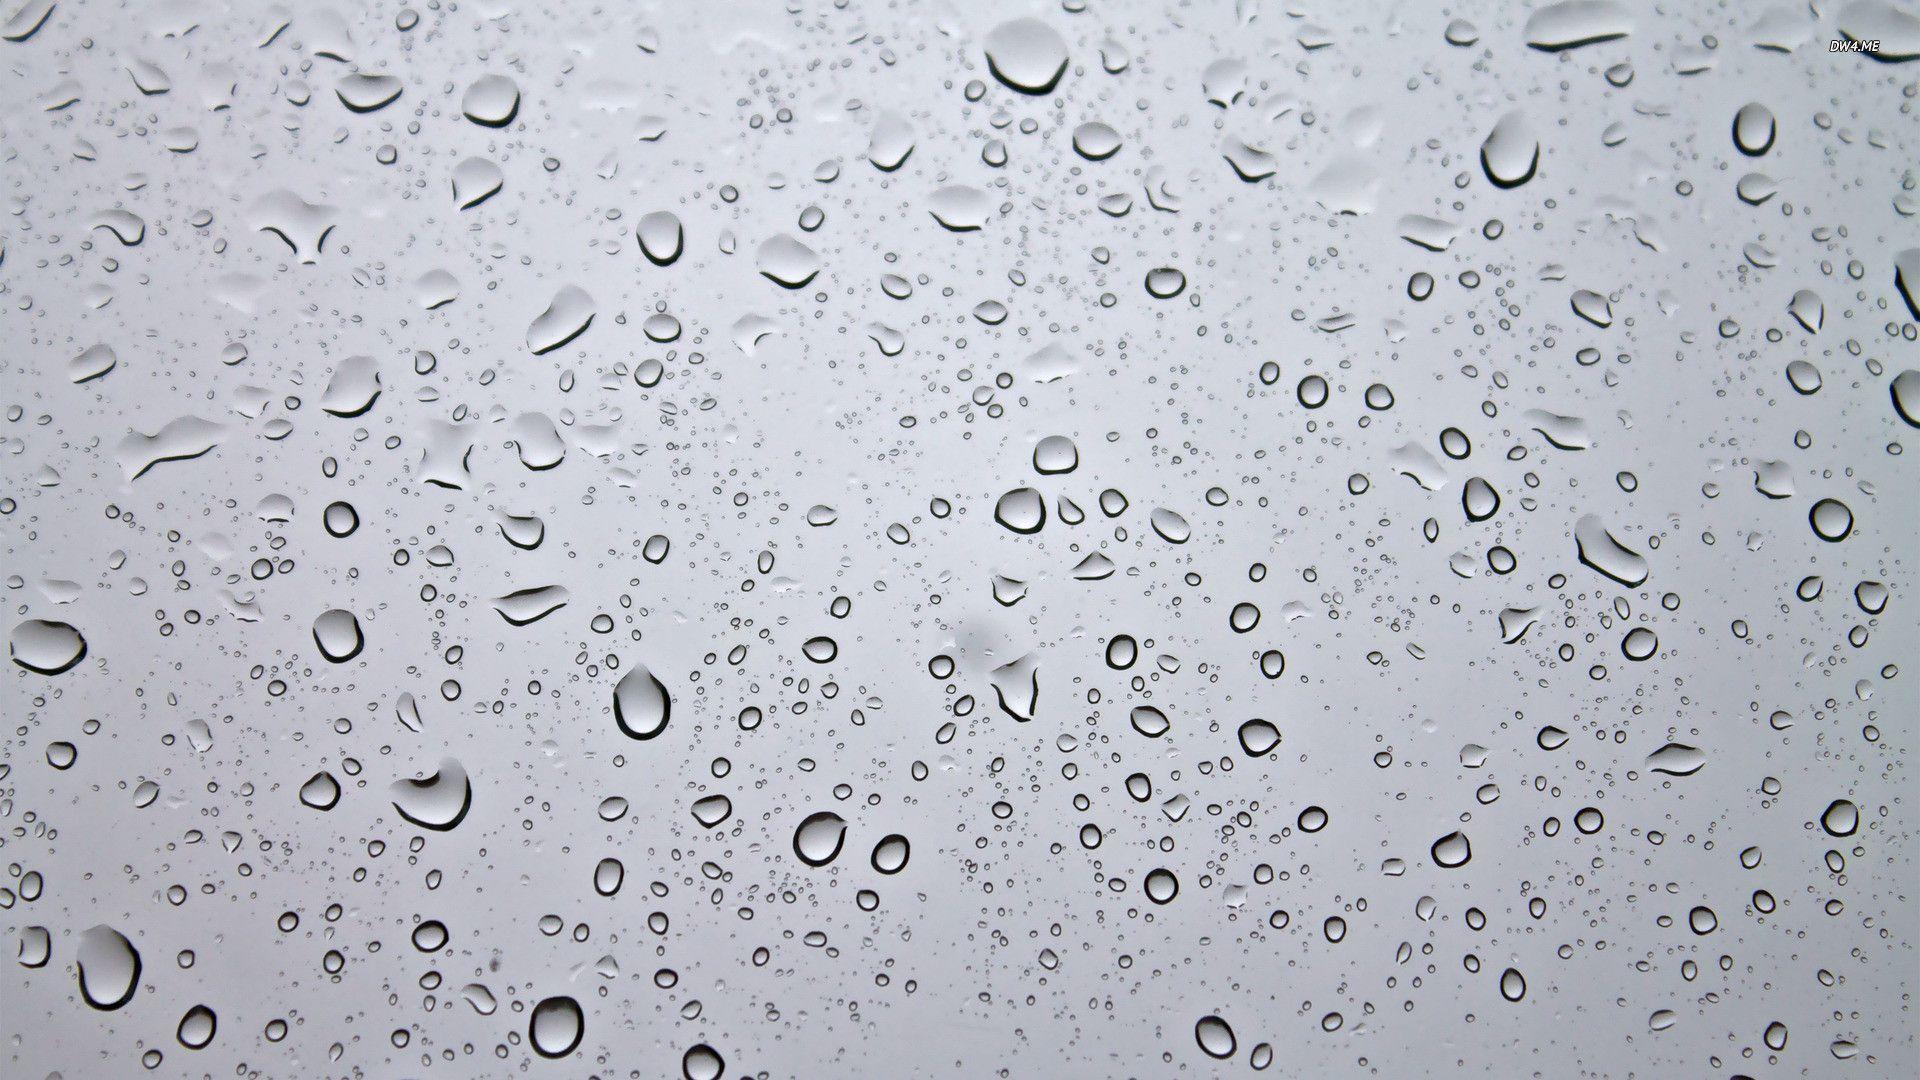 Wallpaper For > Wallpaper Of Water Droplets